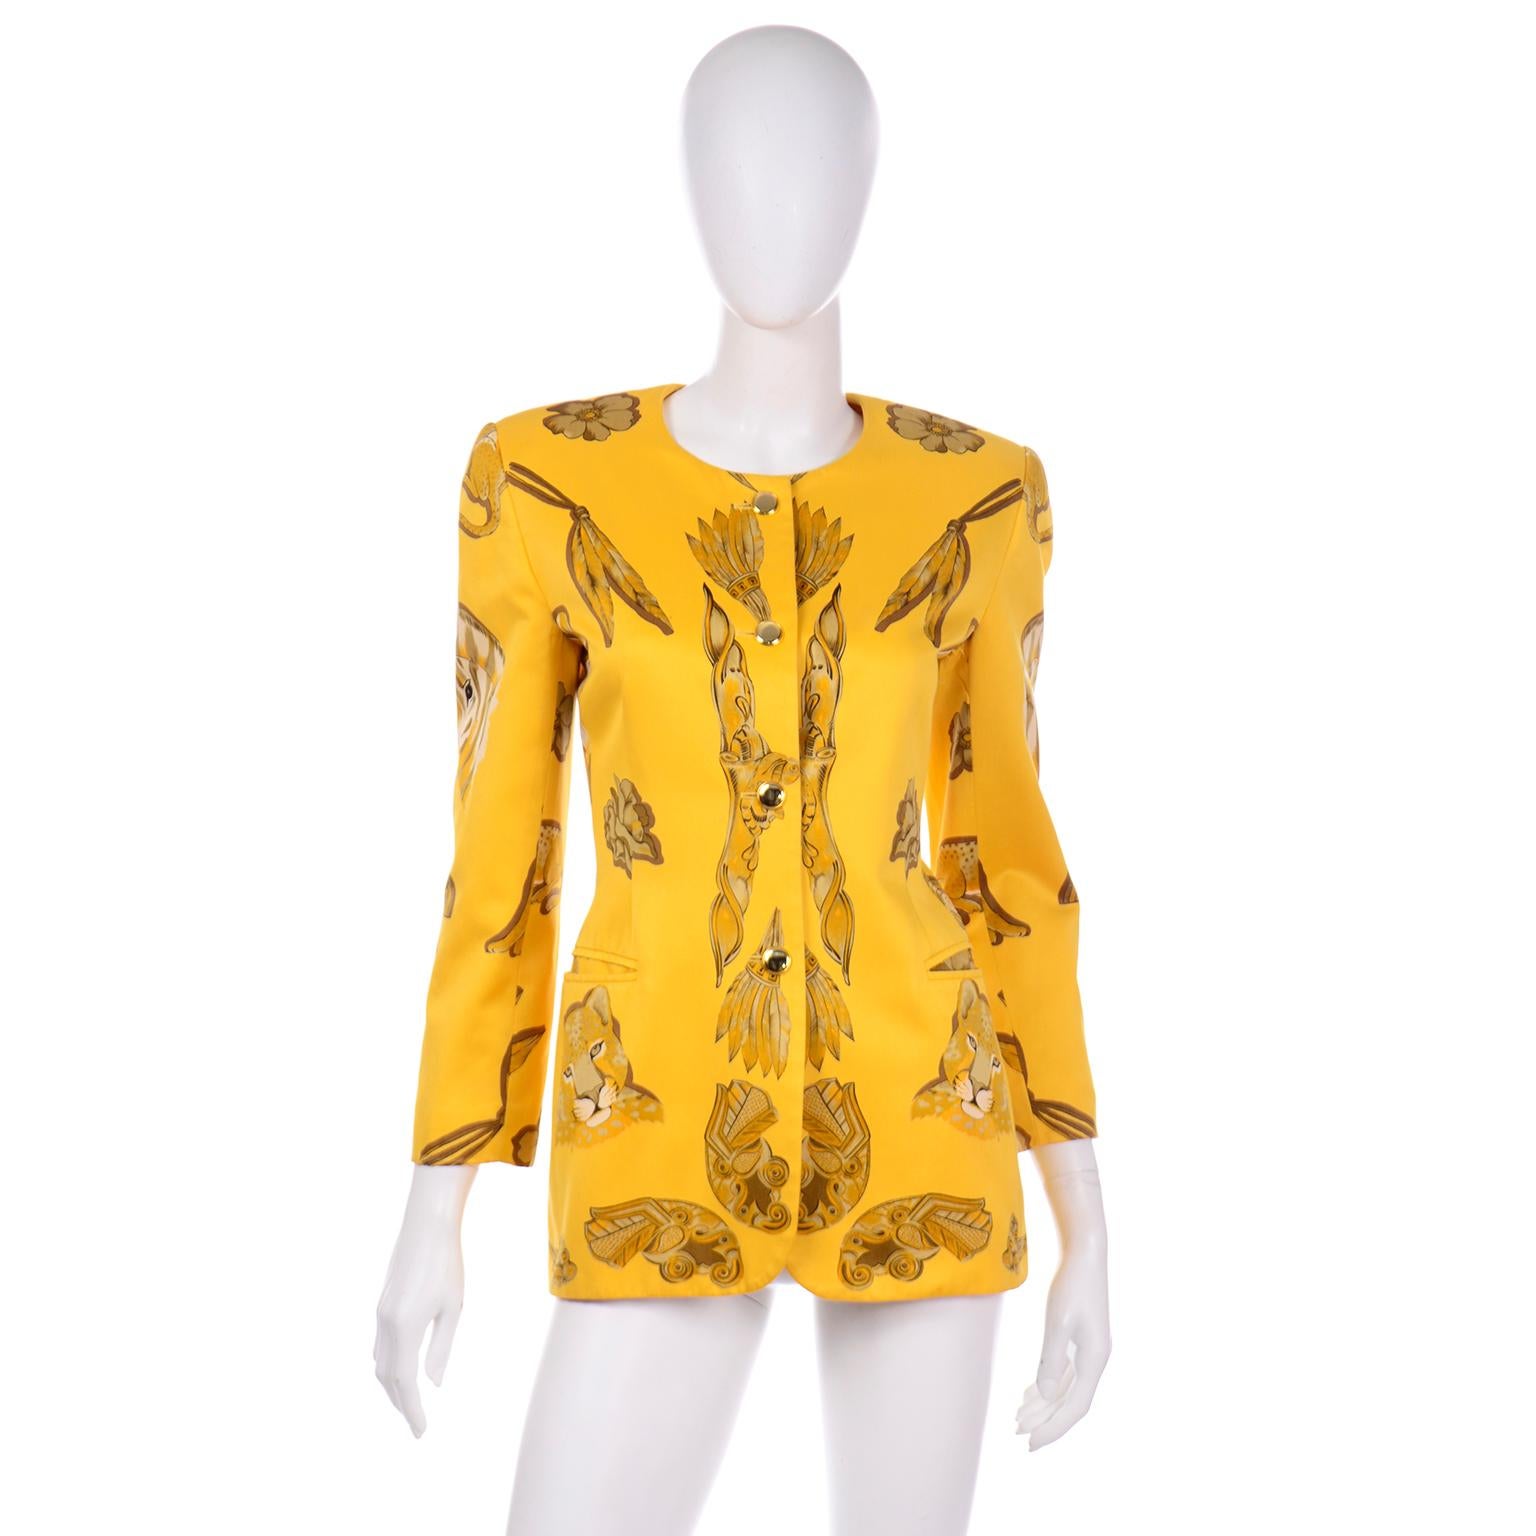 This is a phenomenal Escada polished cotton novelty printed jacket in a gorgeous marigold yellow. We love Margaretha Ley's prints and this one features cheetahs, giraffes, flowers, and various Aztec figures. This jacket has a long line silhouette